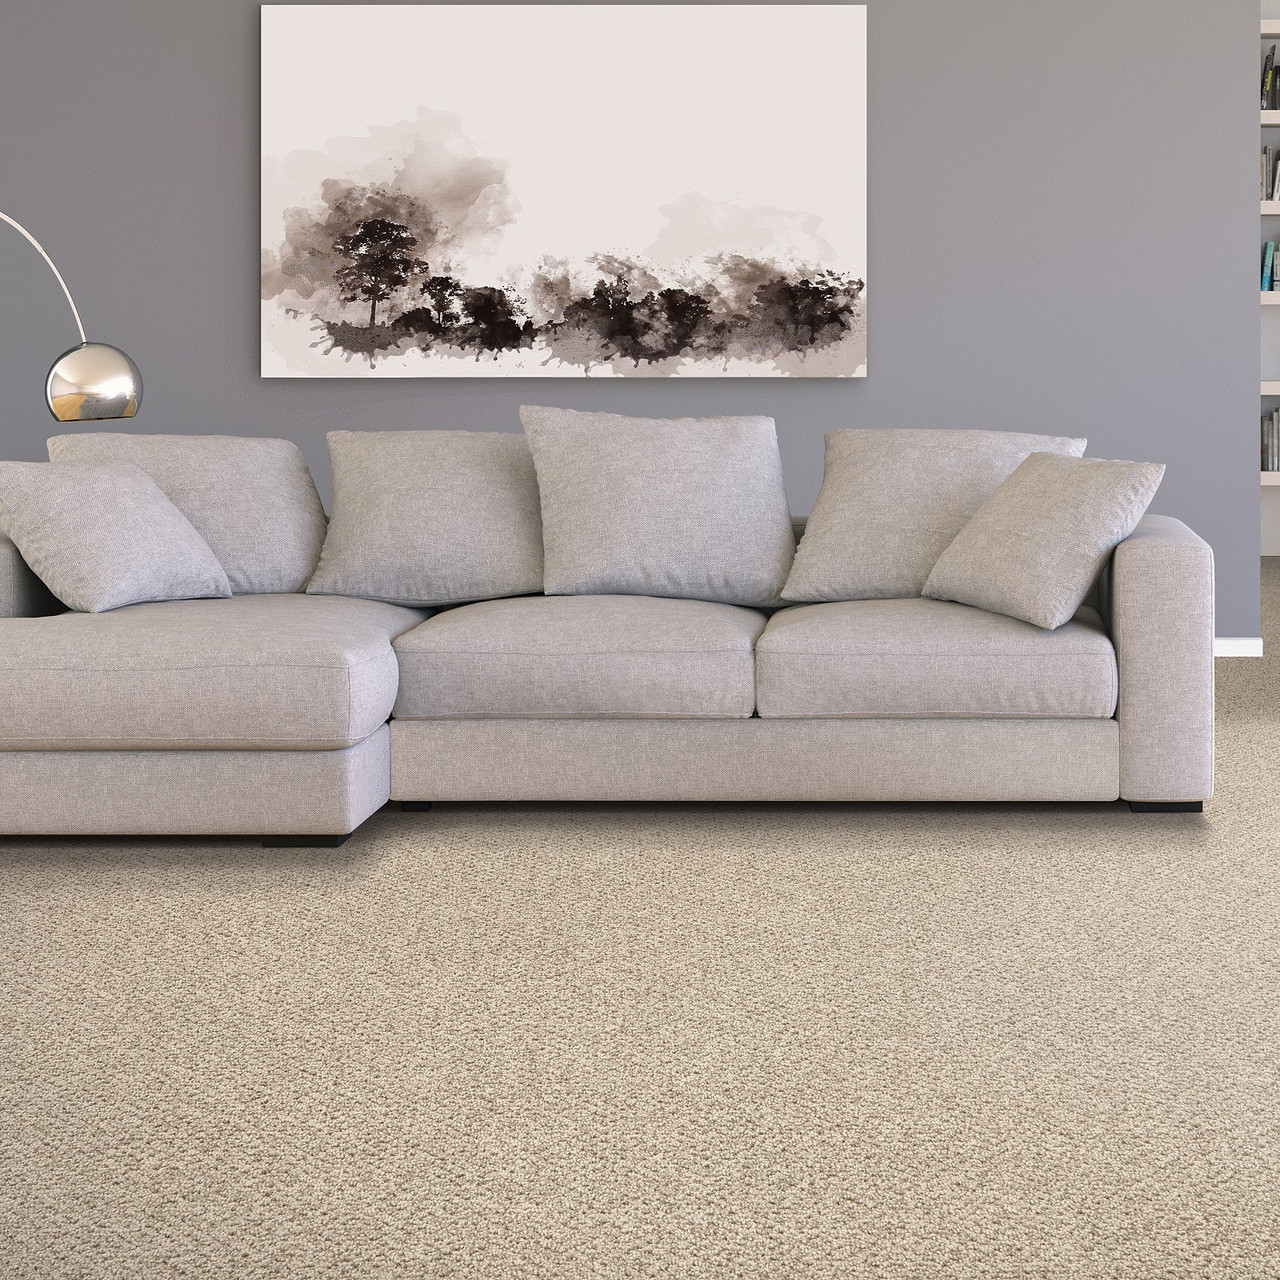 Buy Mohawk Everstrand Cozy Classic Residential Carpet for A Great Value at  Georgia Carpet!